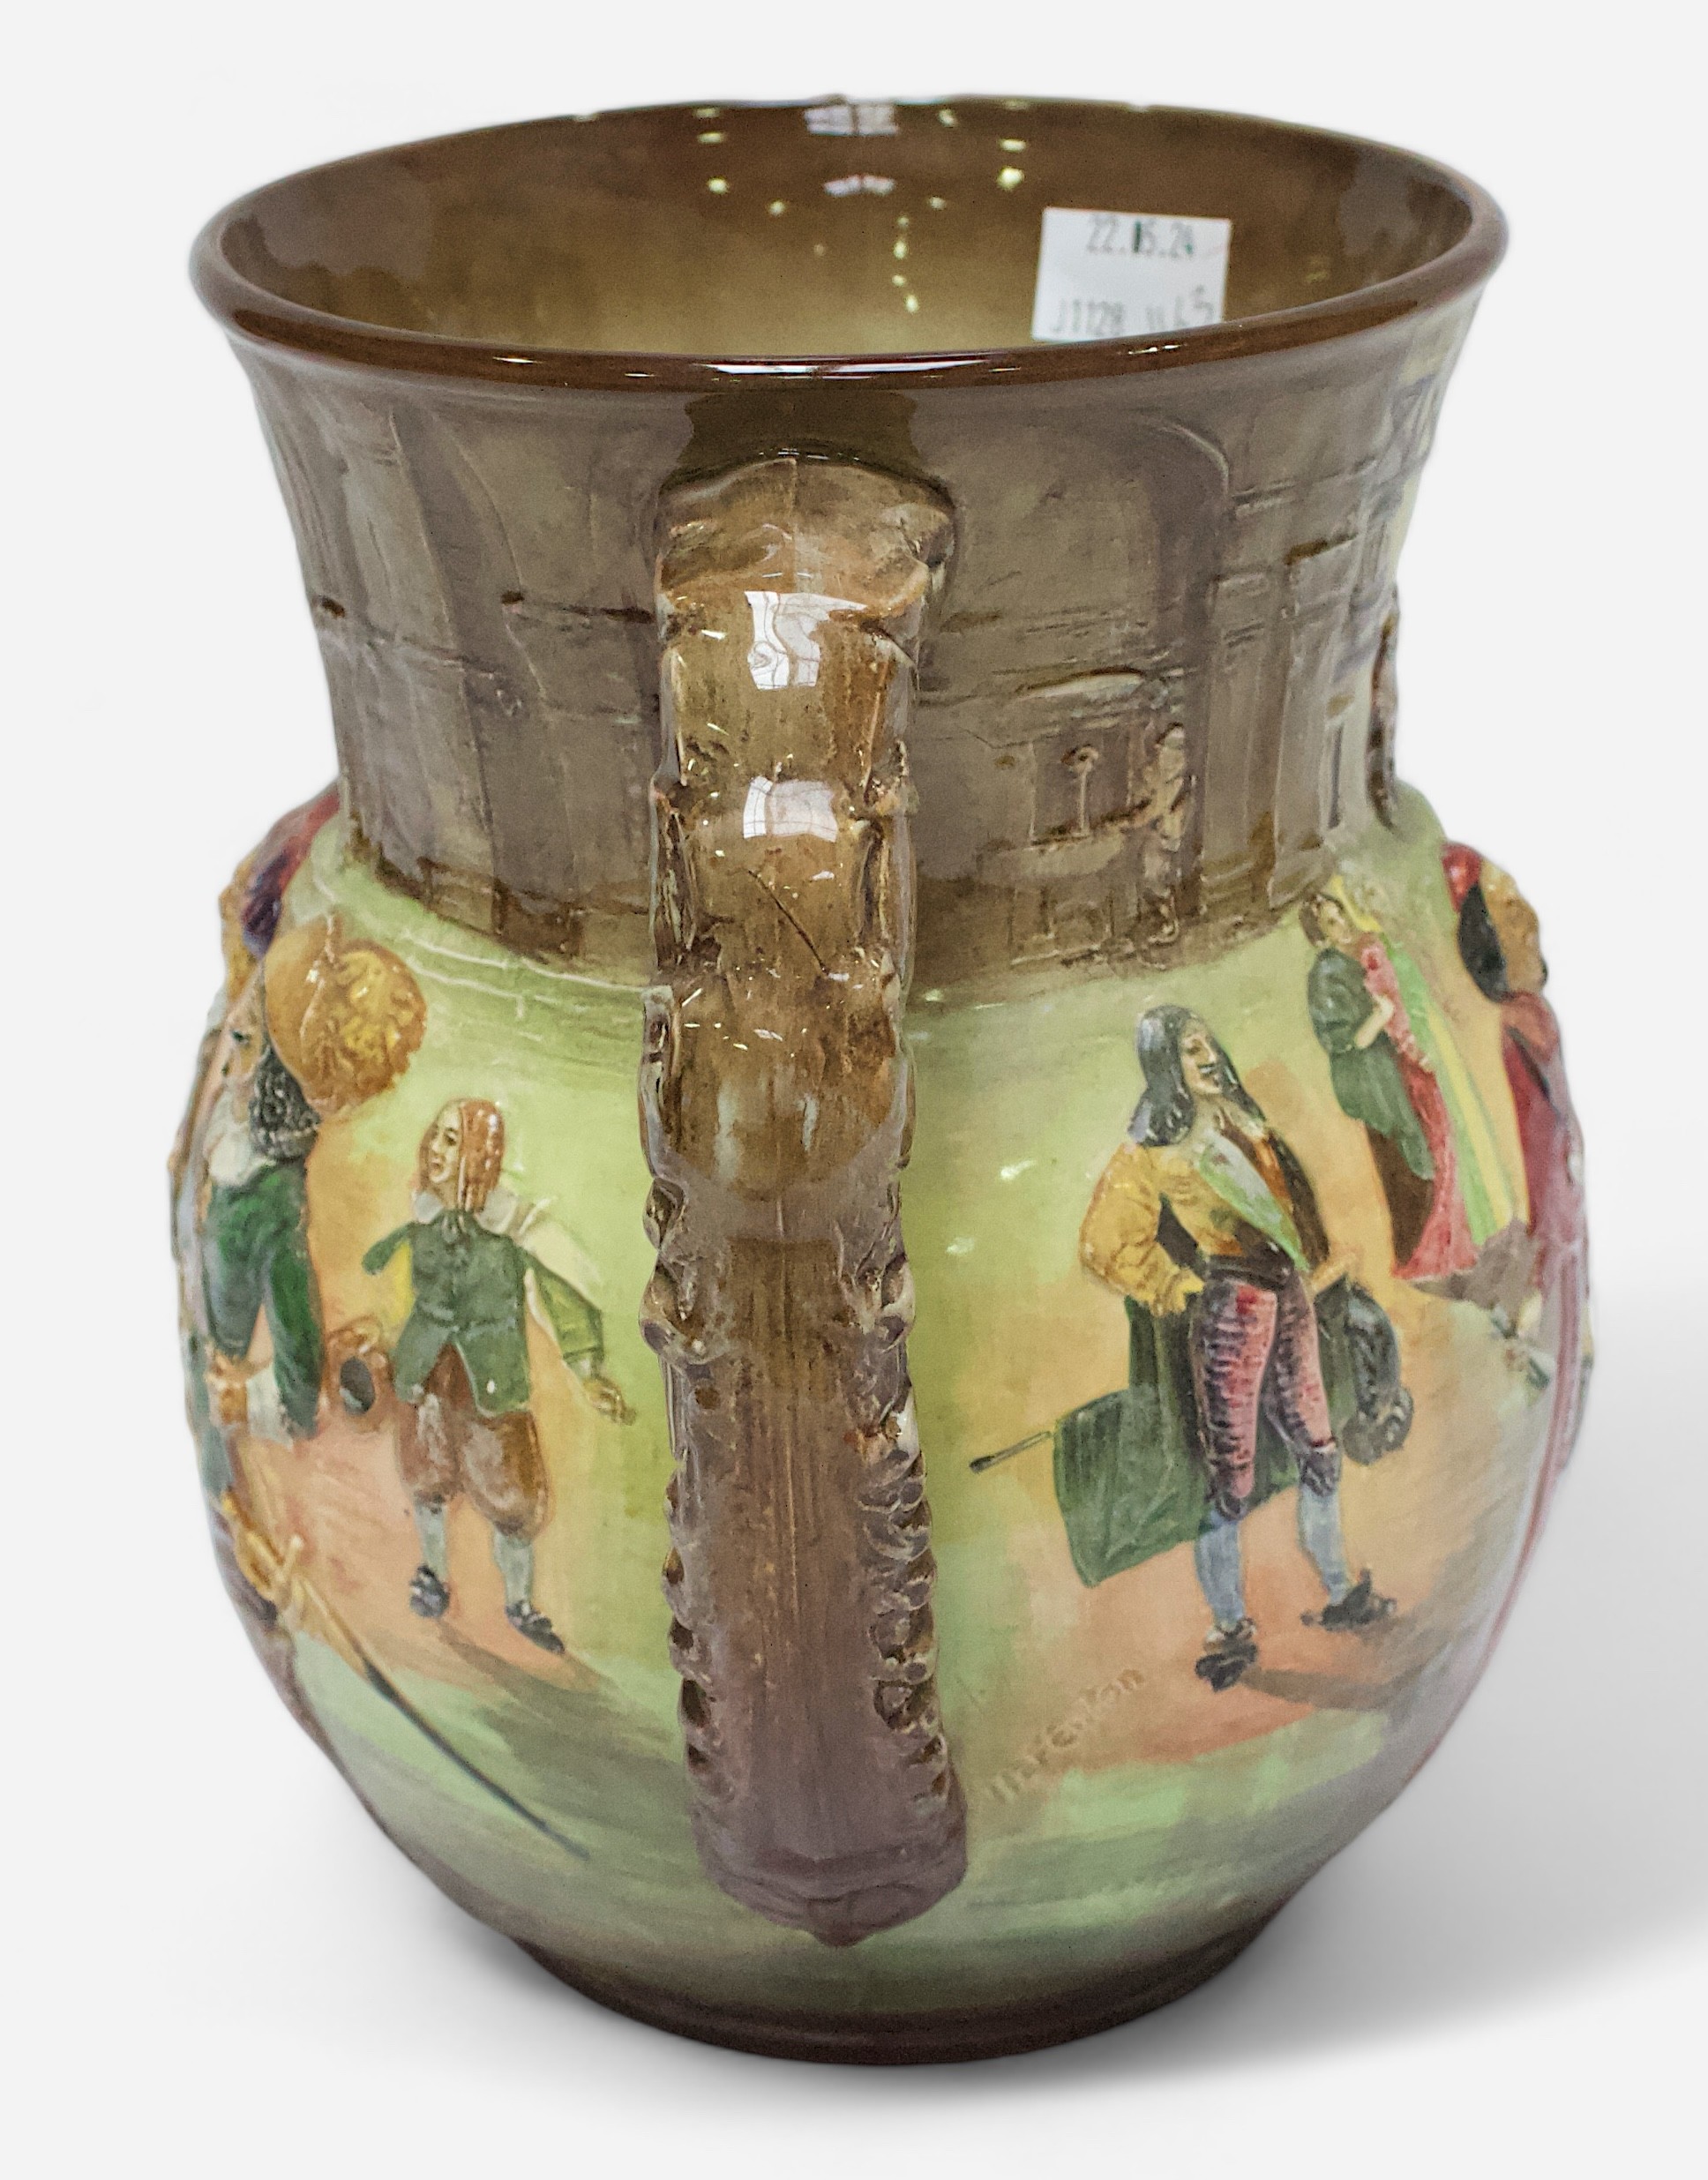 A Royal Doulton loving cup, ‘The Great Romance of Louis XIII Reign’ The Three Musketeers by Dumas, - Image 4 of 6